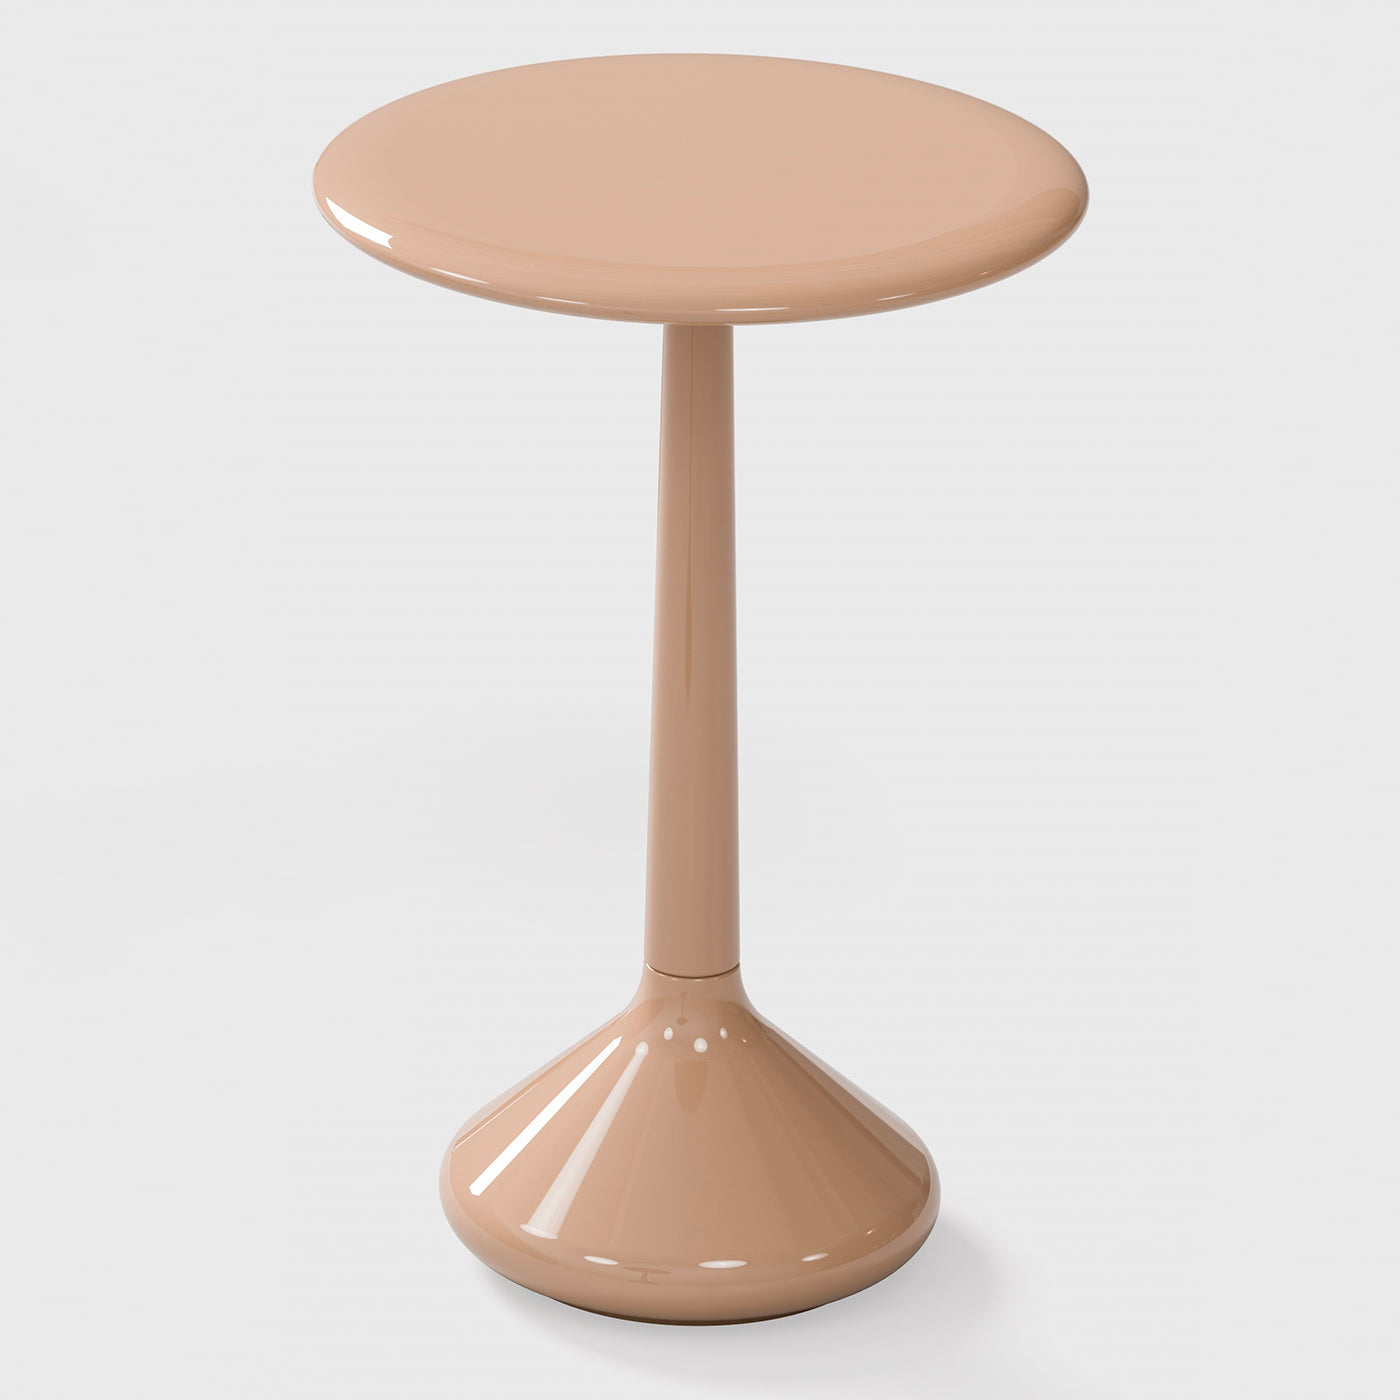 Glossy Laquered Cream Side Table - Alternative view 1